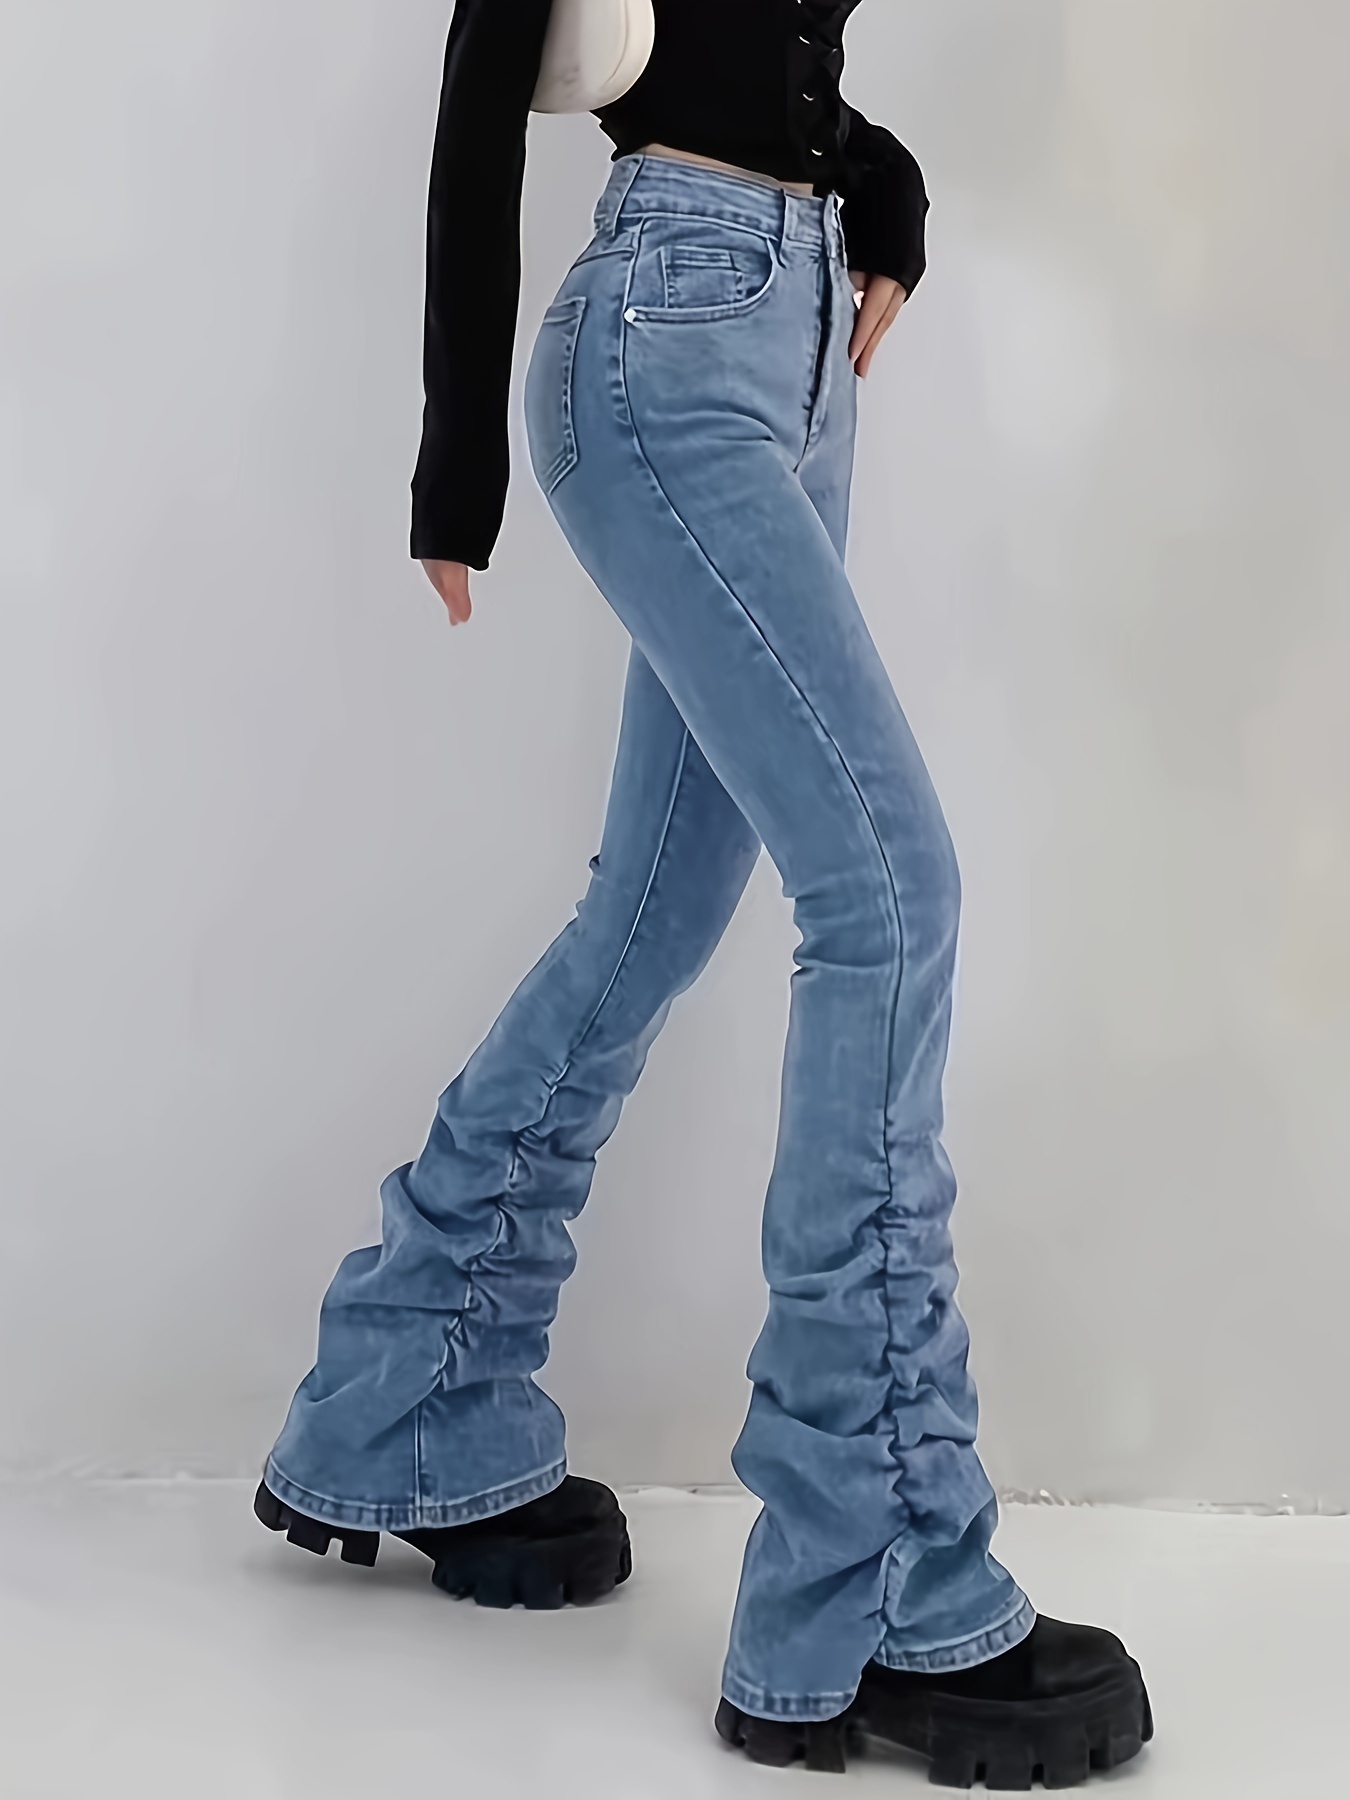 High Waist Chic Stacked Jeans, Slant Pockets High Stretch Bootcut Jeans,  Women's Denim Jeans & Clothing